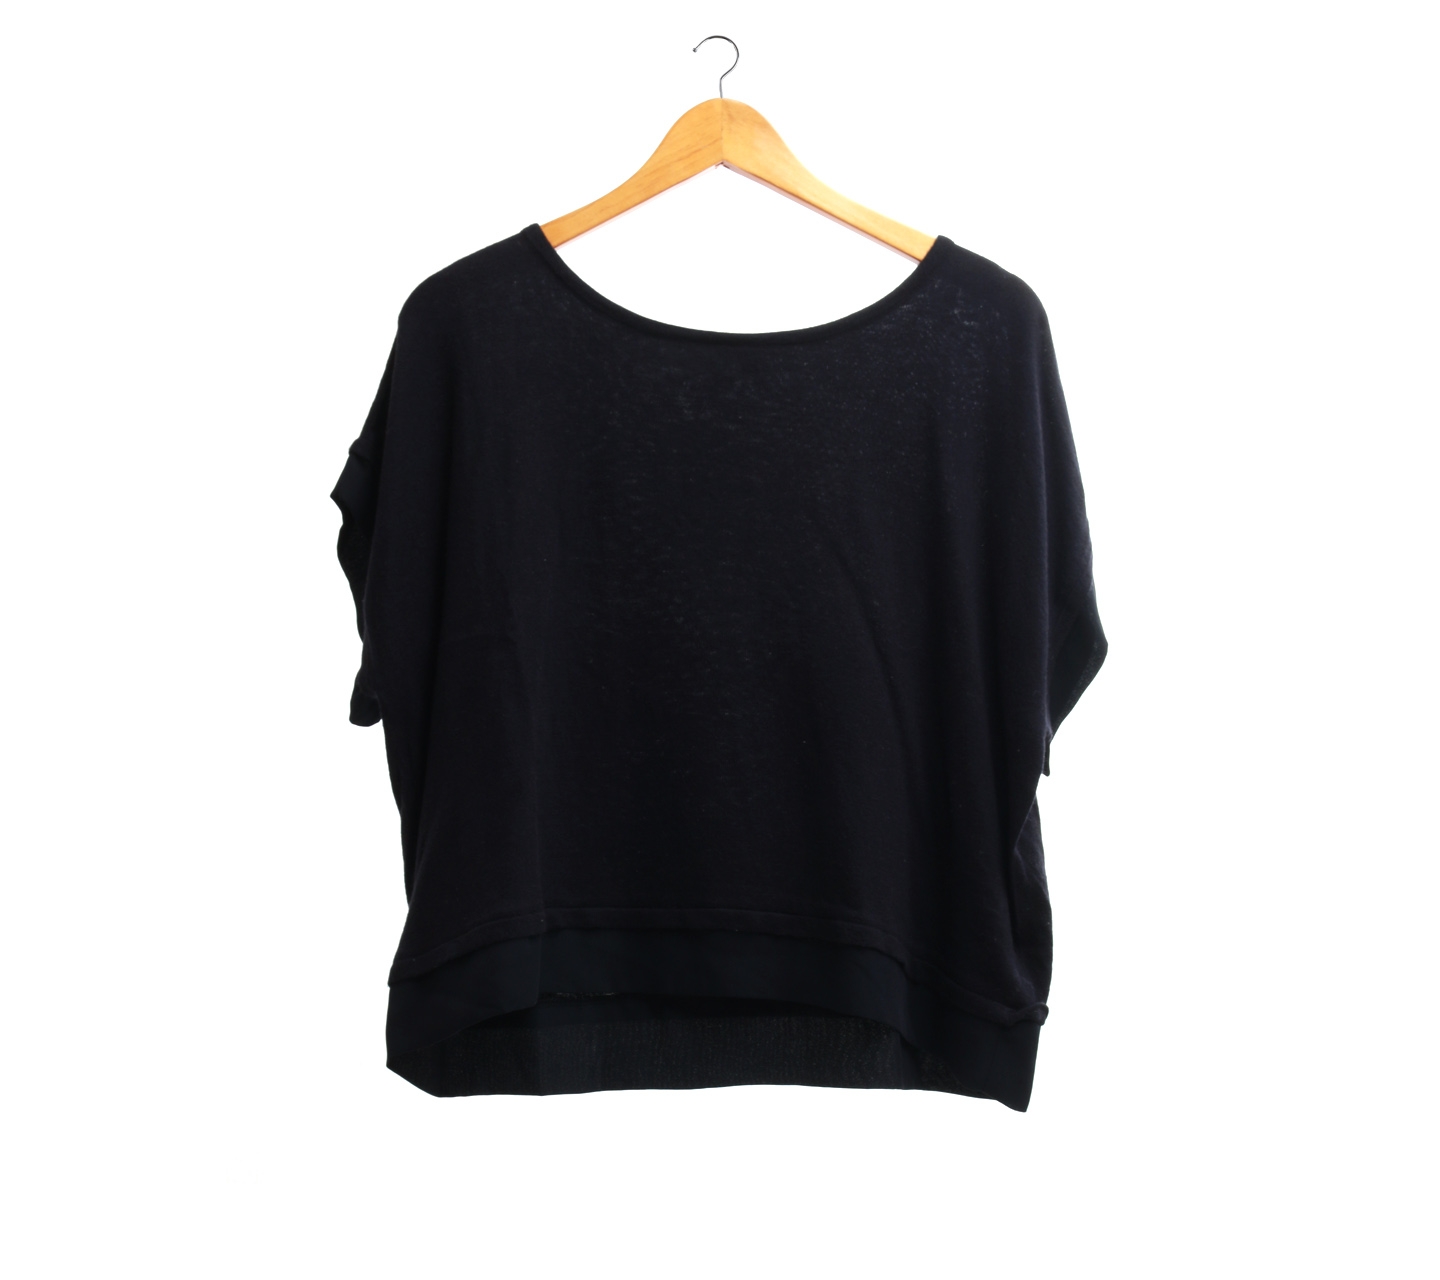 The Limeted Black Crop Blouse